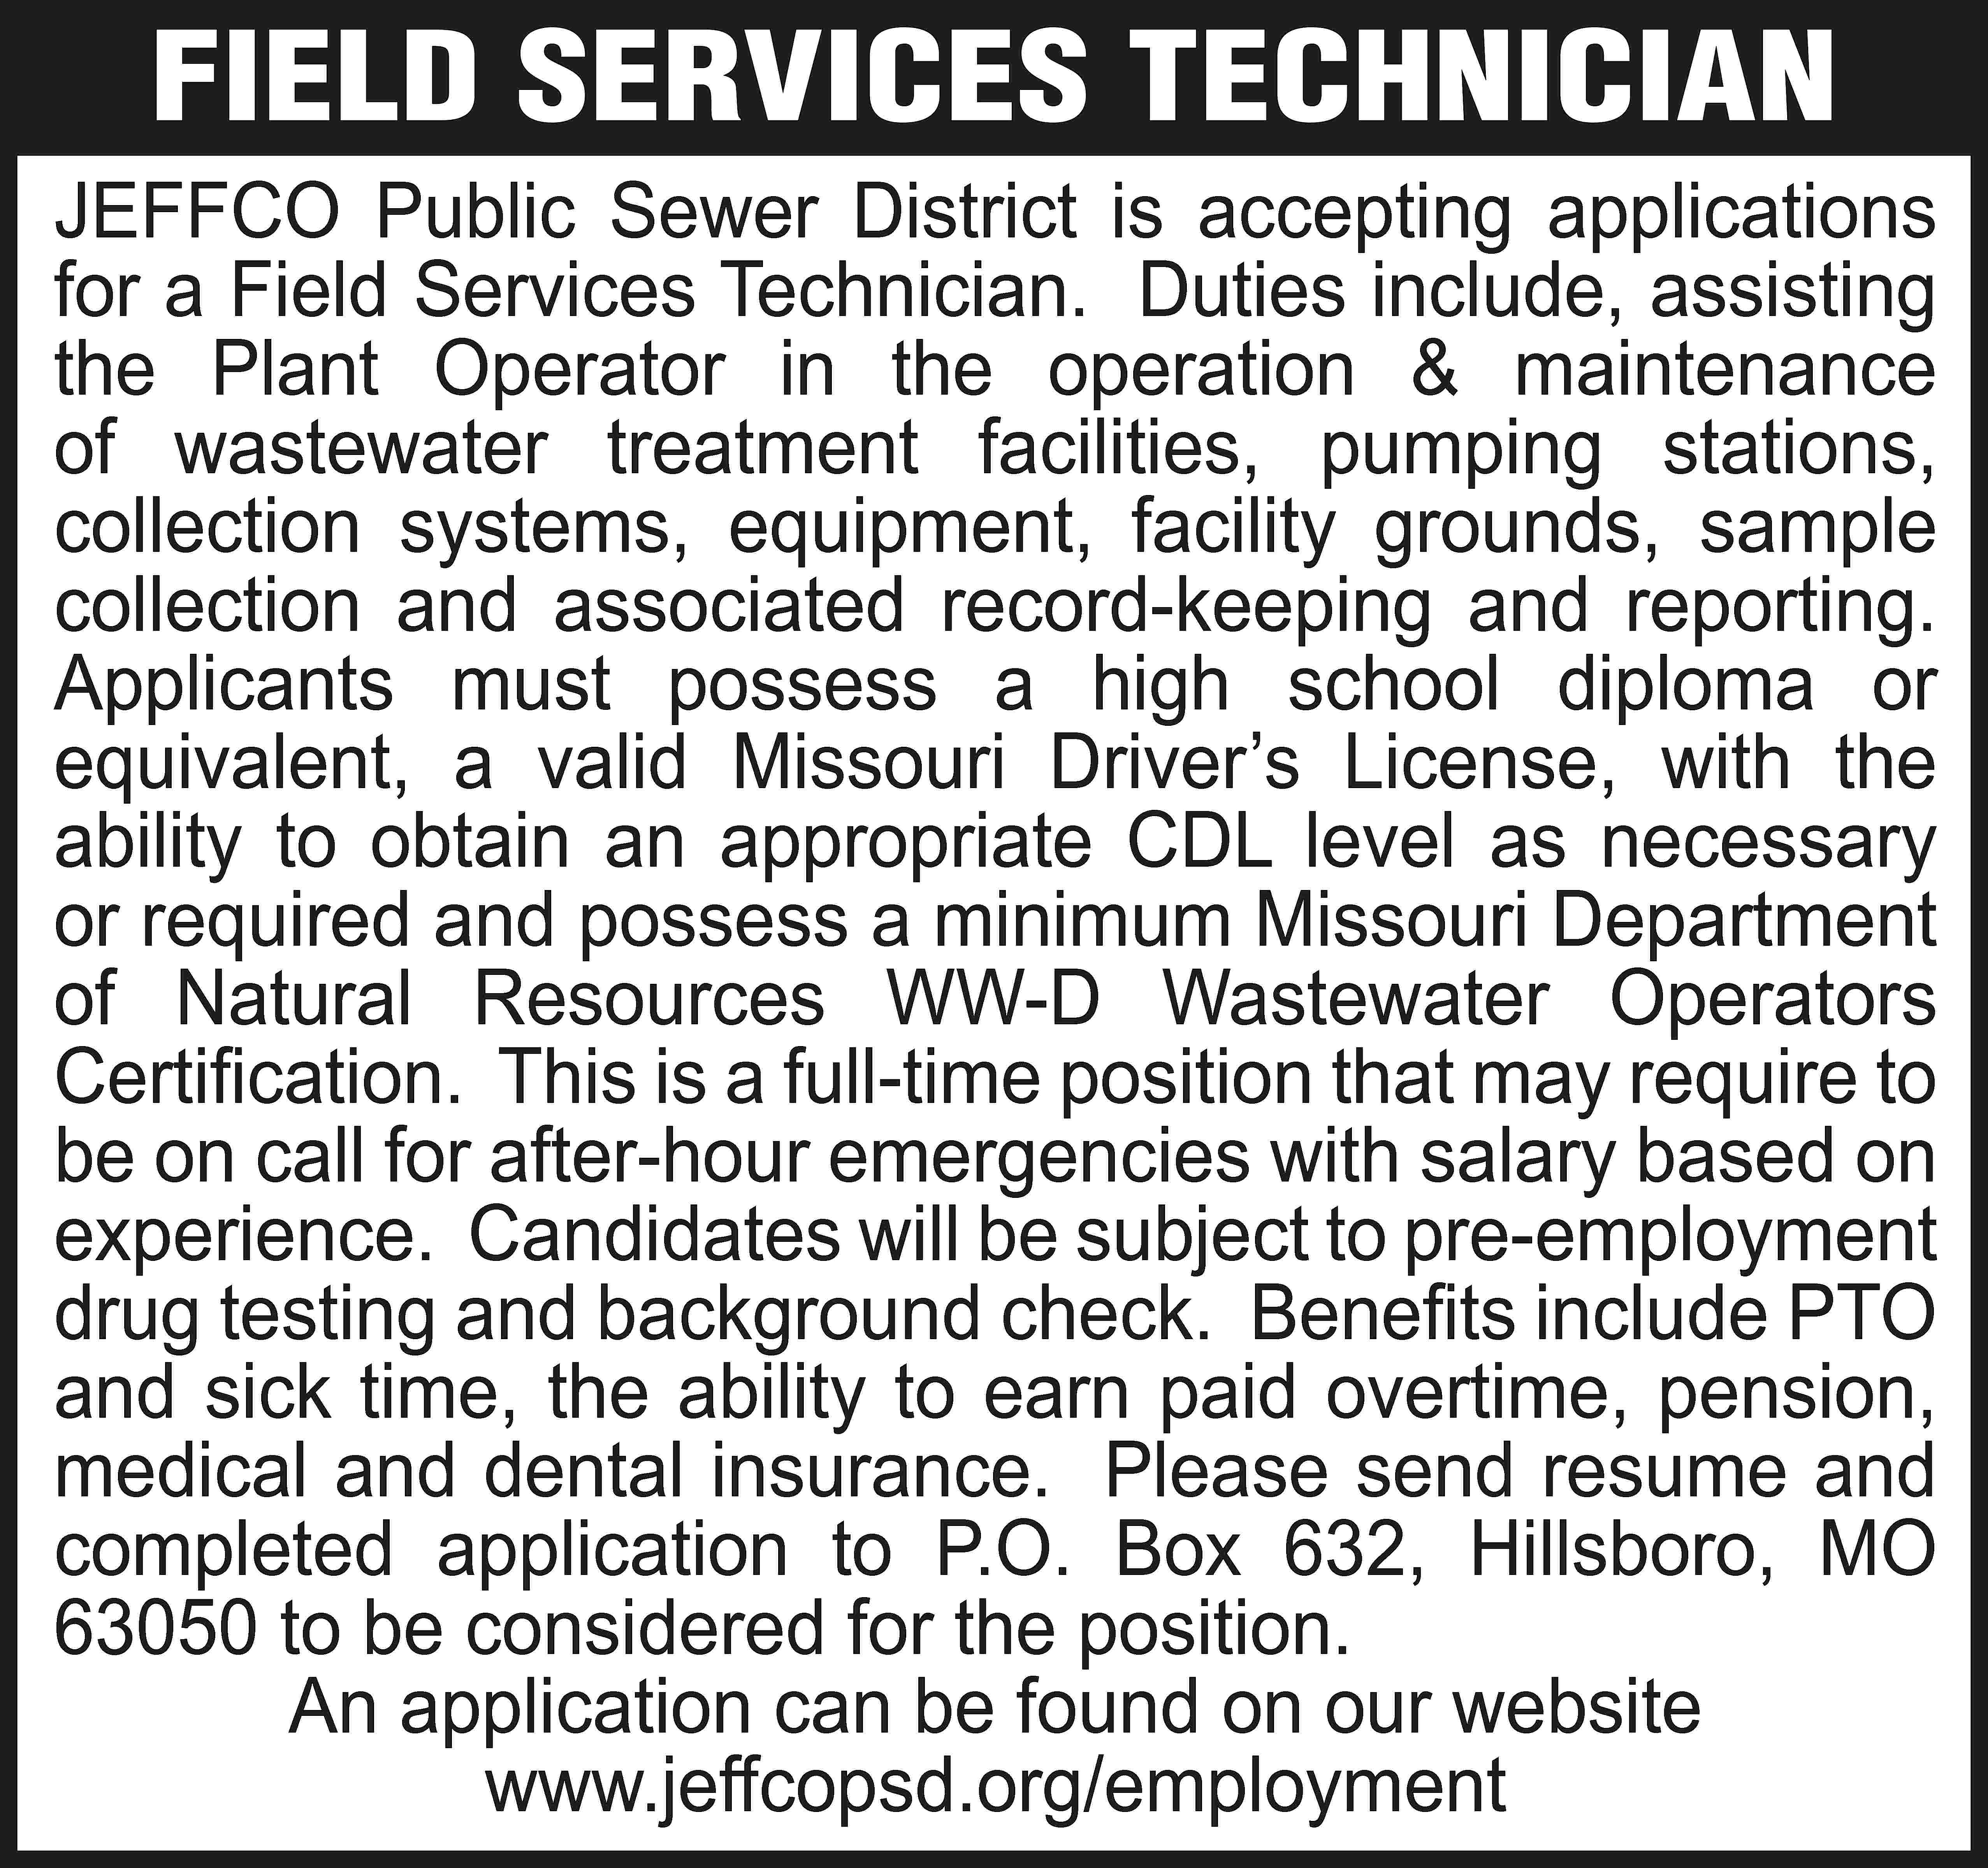 FIELD SERVICES TECHNICIAN JEFFCO Public  FIELD SERVICES TECHNICIAN JEFFCO Public Sewer District is accepting applications for a Field Services Technician. Duties include, assisting the Plant Operator in the operation & maintenance of wastewater treatment facilities, pumping stations, collection systems, equipment, facility grounds, sample collection and associated record-keeping and reporting. Applicants must possess a high school diploma or equivalent, a valid Missouri Driver’s License, with the ability to obtain an appropriate CDL level as necessary or required and possess a minimum Missouri Department of Natural Resources WW-D Wastewater Operators Certification. This is a full-time position that may require to be on call for after-hour emergencies with salary based on experience. Candidates will be subject to pre-employment drug testing and background check. Benefits include PTO and sick time, the ability to earn paid overtime, pension, medical and dental insurance. Please send resume and completed application to P.O. Box 632, Hillsboro, MO 63050 to be considered for the position. An application can be found on our website www.jeffcopsd.org/employment